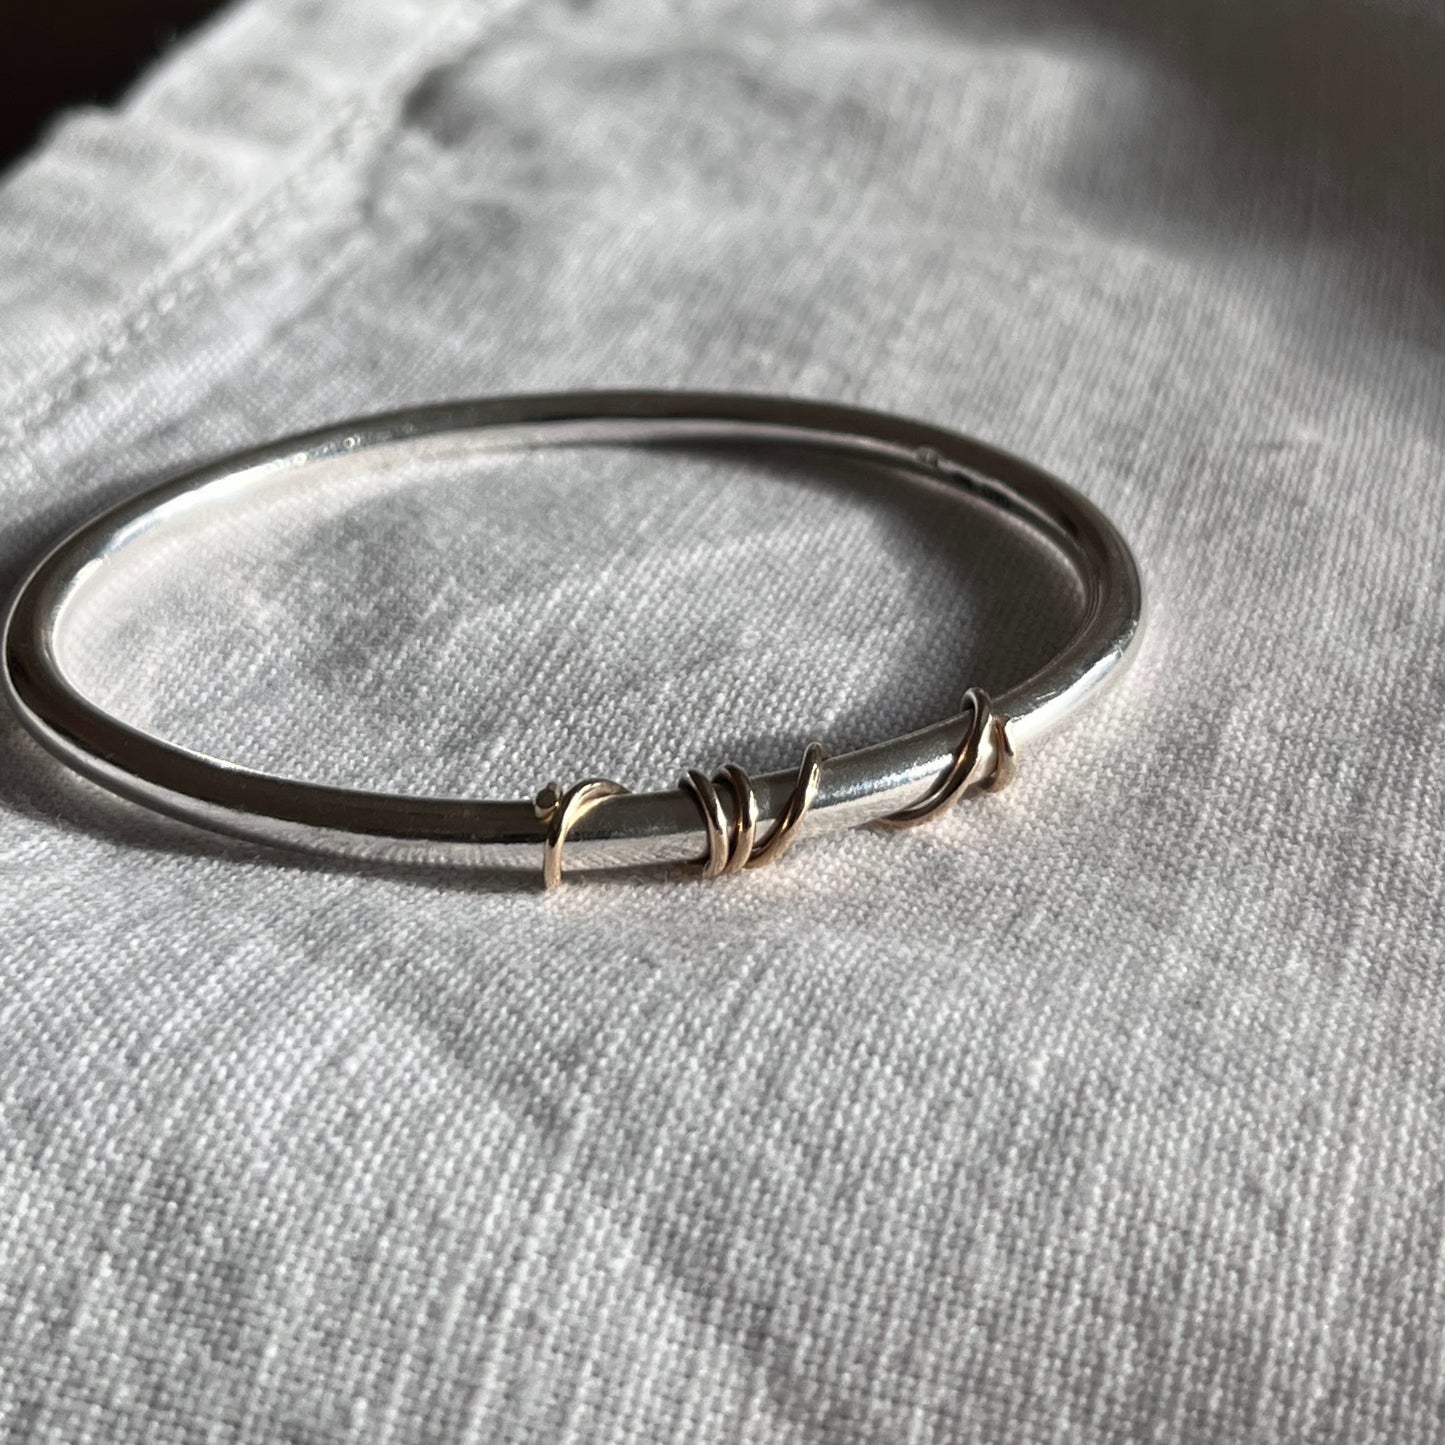 handmade sterling silver solid bangle with 9ct gold wrap of wire twisted around the front of the bangle